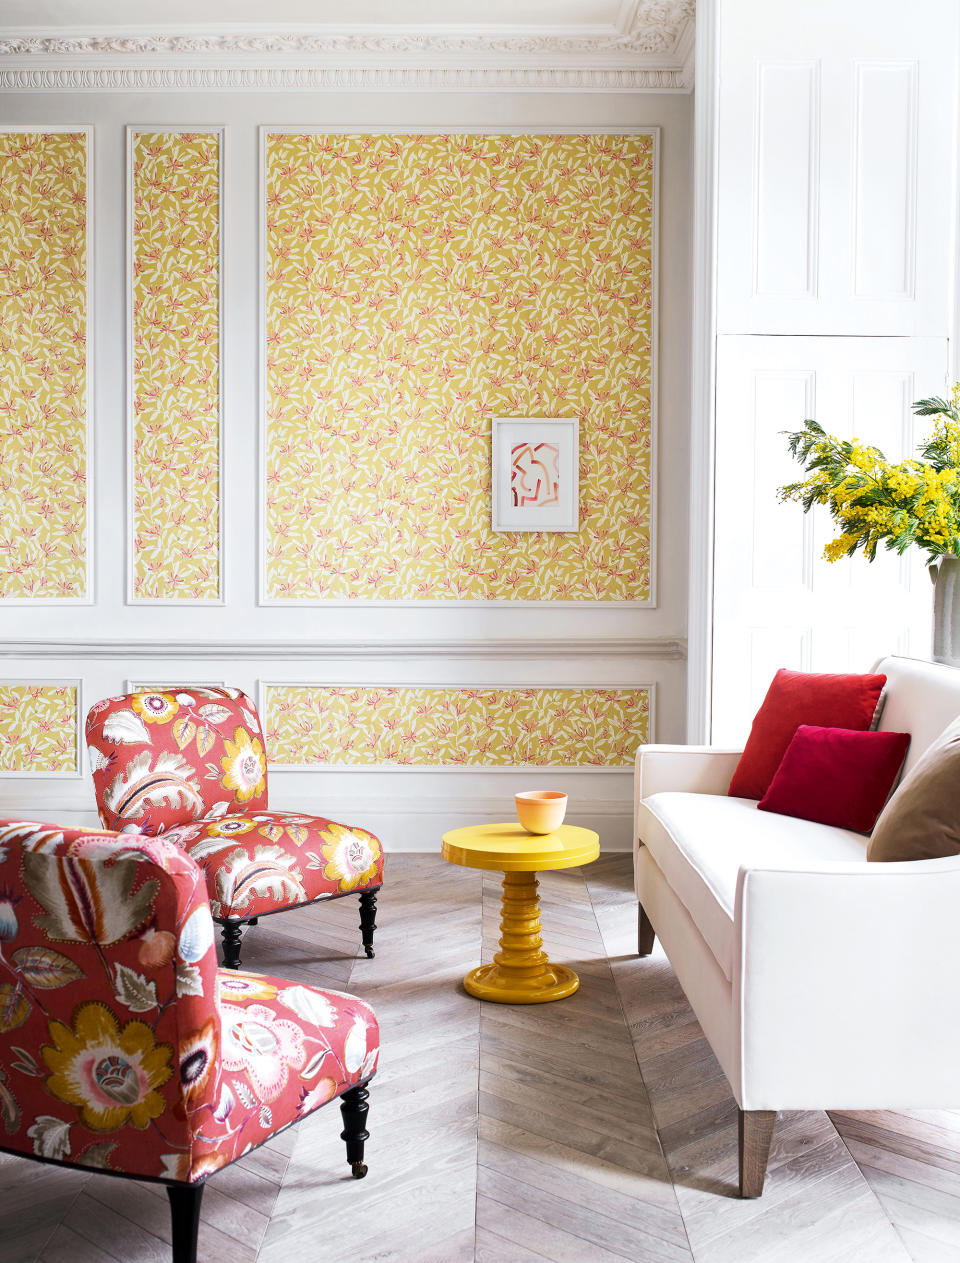 <p> A living room wallpaper is a fabulous way to bring color into a space. A mural or a large-scale design can make a  bold statement but is not for everyone. For something that's easy to live with choose a small-scale repeat design such as the joyful Honeysuckle design from Jane Churchill in this yellow living room idea. </p> <p> Setting it within wall paneling will also help calm the look. While this paper appears sunshine yellow at first glance, it does in fact have an array of colors within it including pink and red which have here been drawn out as accent colors and used on the upholstery to create a playful contrast. </p>